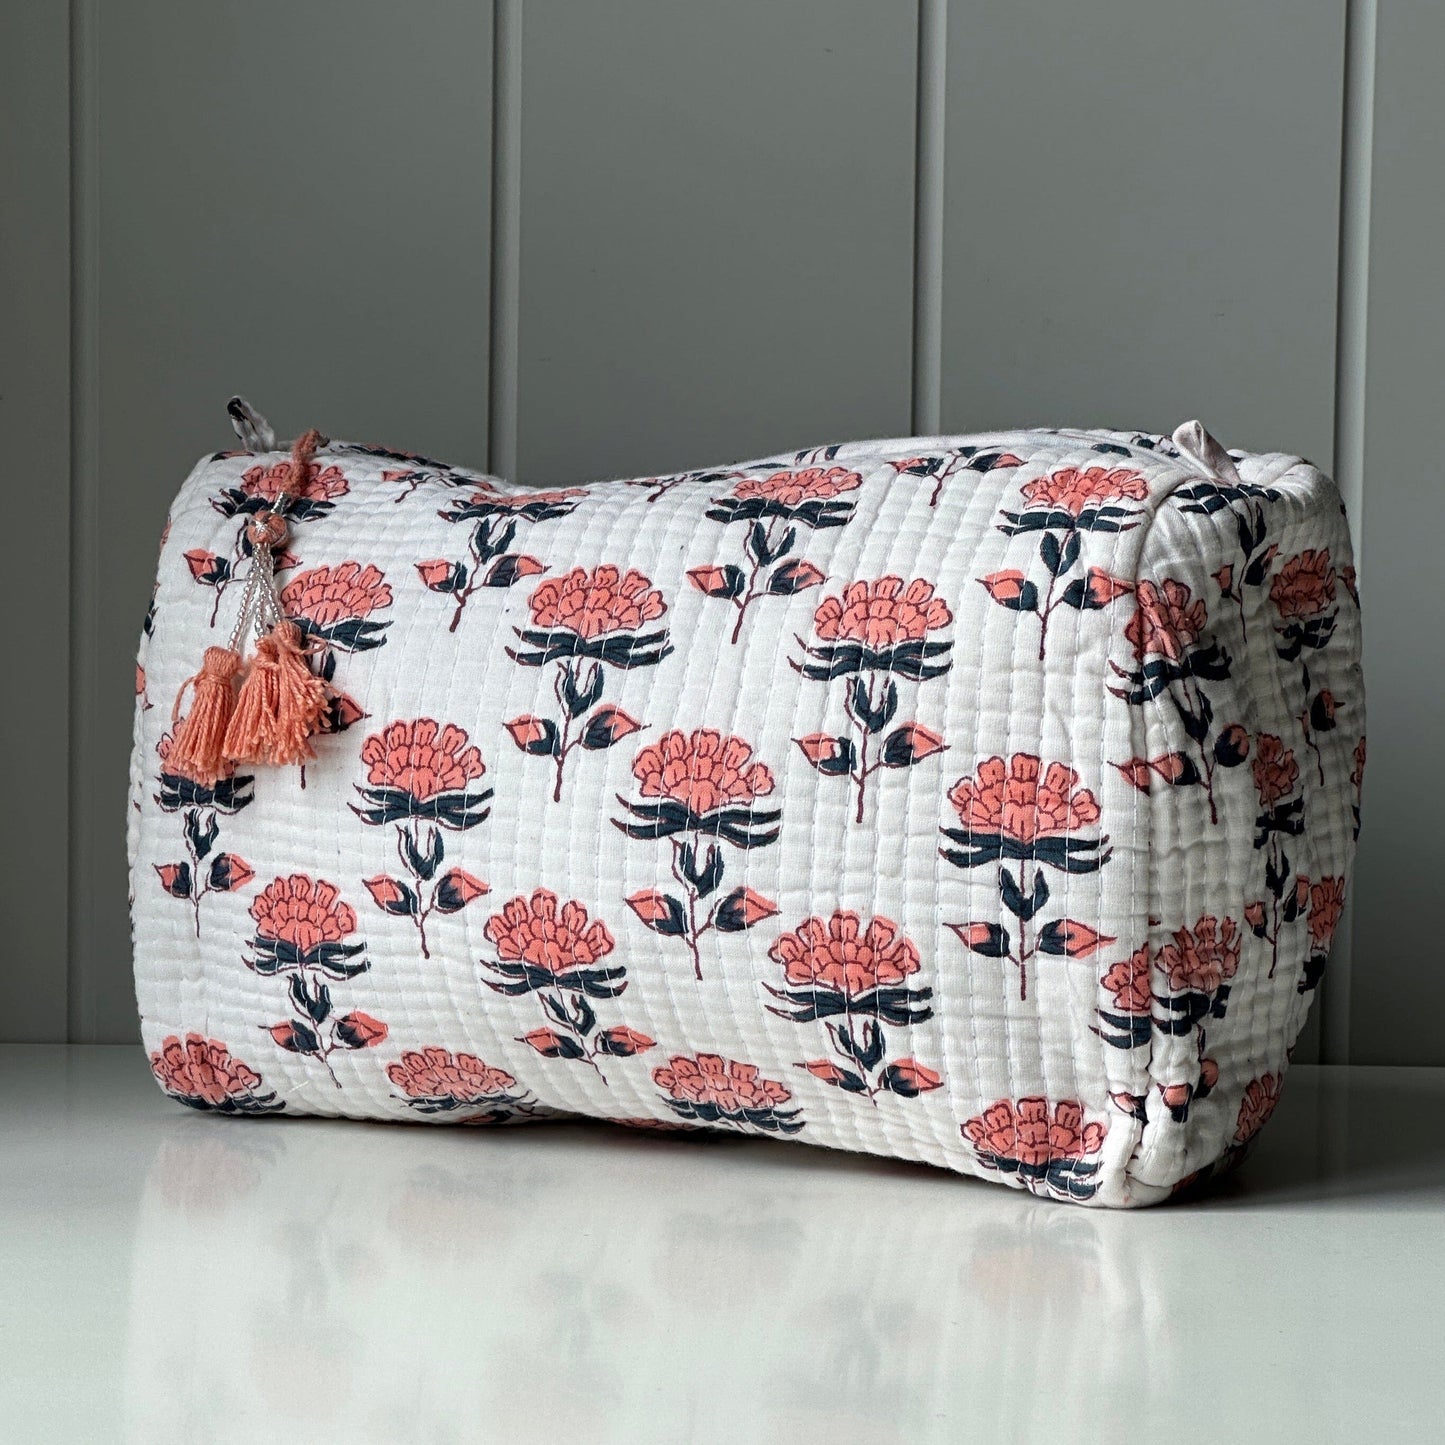 Lifestyle Cosmetics Bag - Coral Flowers on White